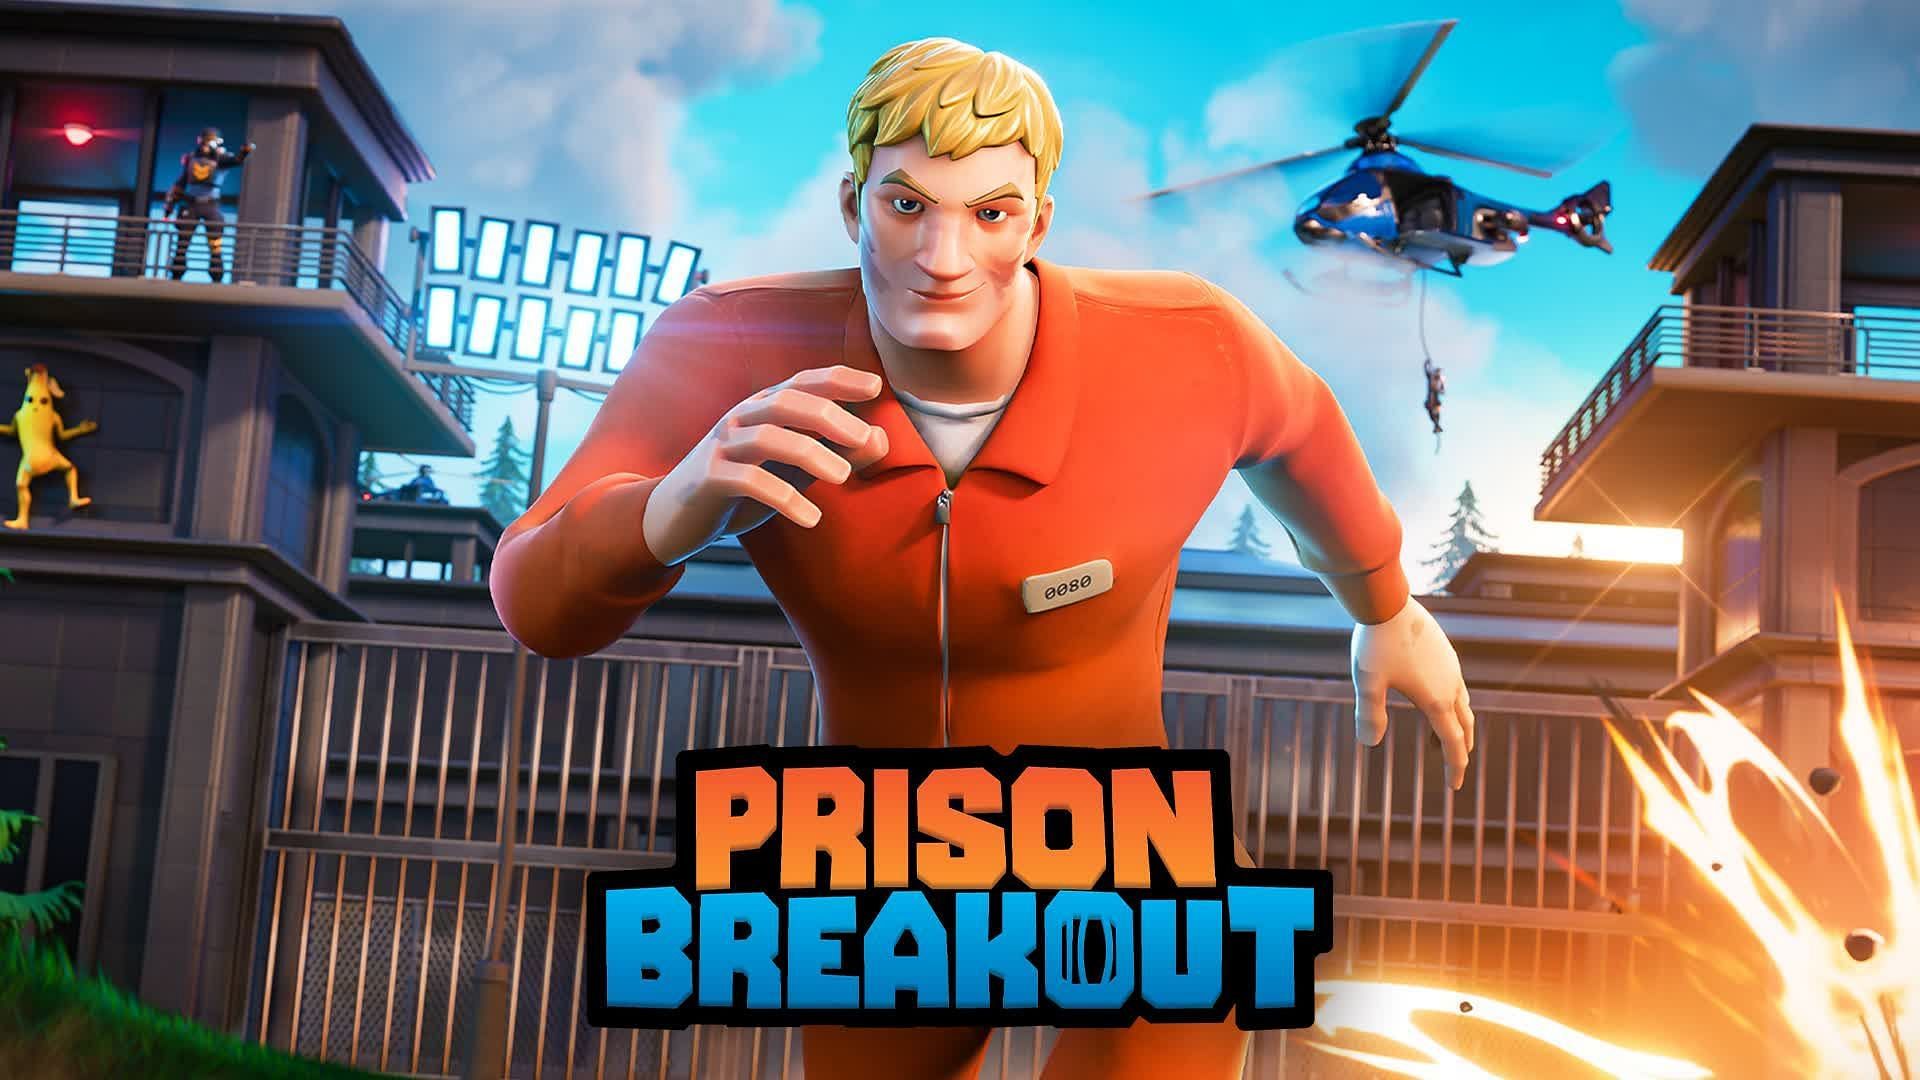 Fortnite Prison Breakout RP: UEFN map code, how to play, and more